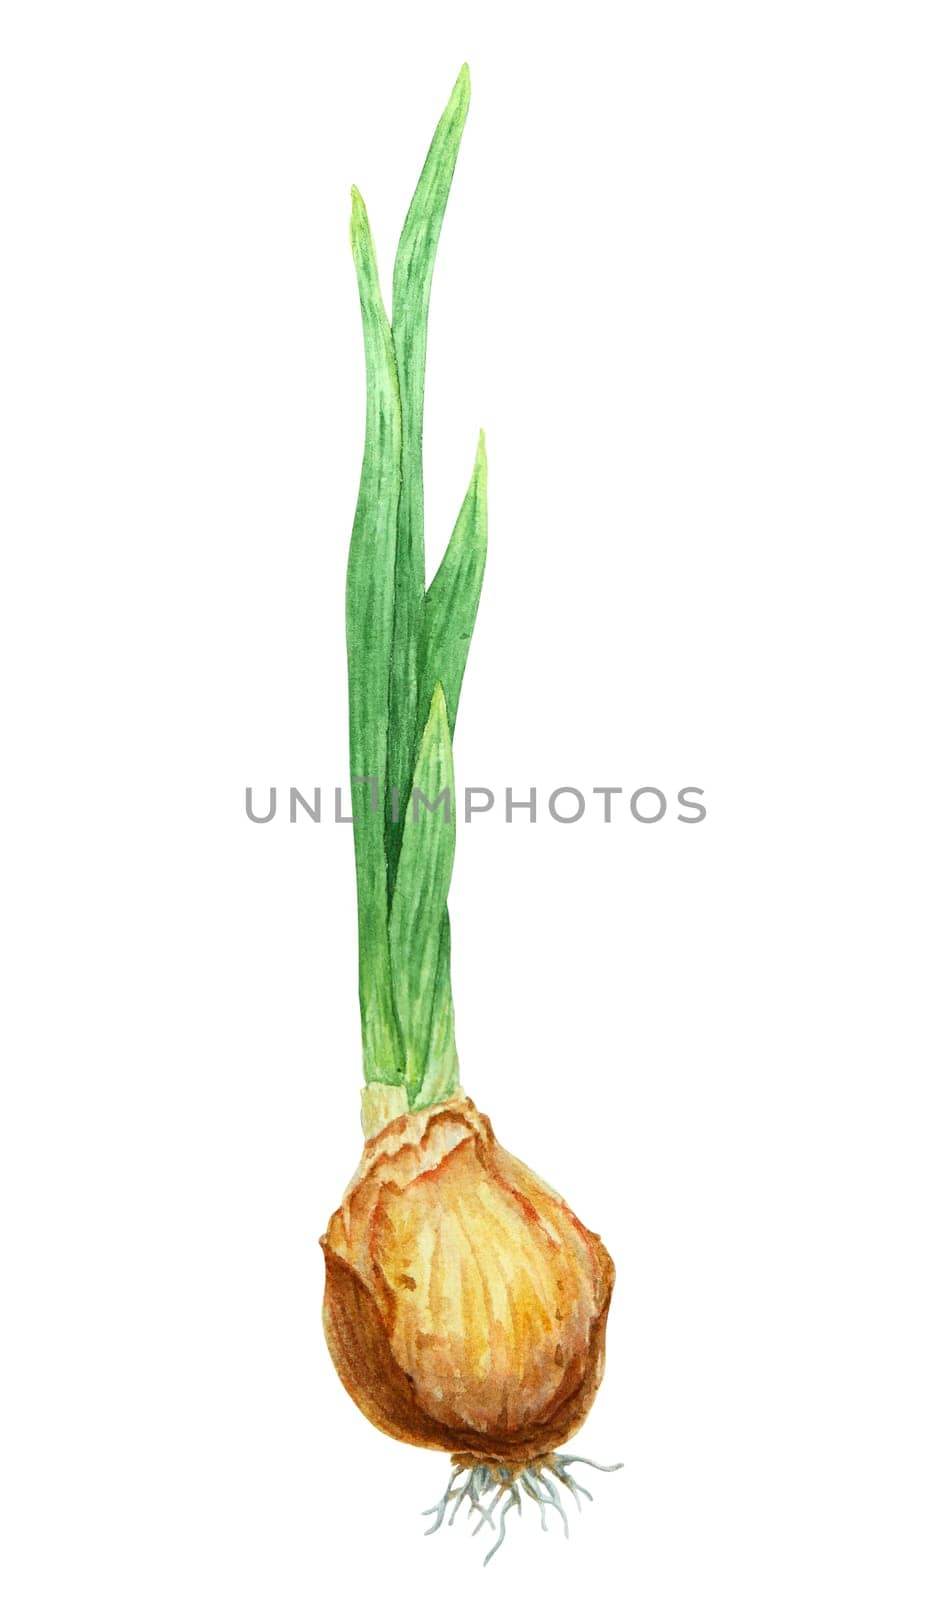 Bulb of plant, flower. Watercolor hand drawn illustration of narcissus, onion, tulip, hyacinth. Botanical painting of spring garden flower for greeting, wedding, Easter, Mothers day, farmers prints.